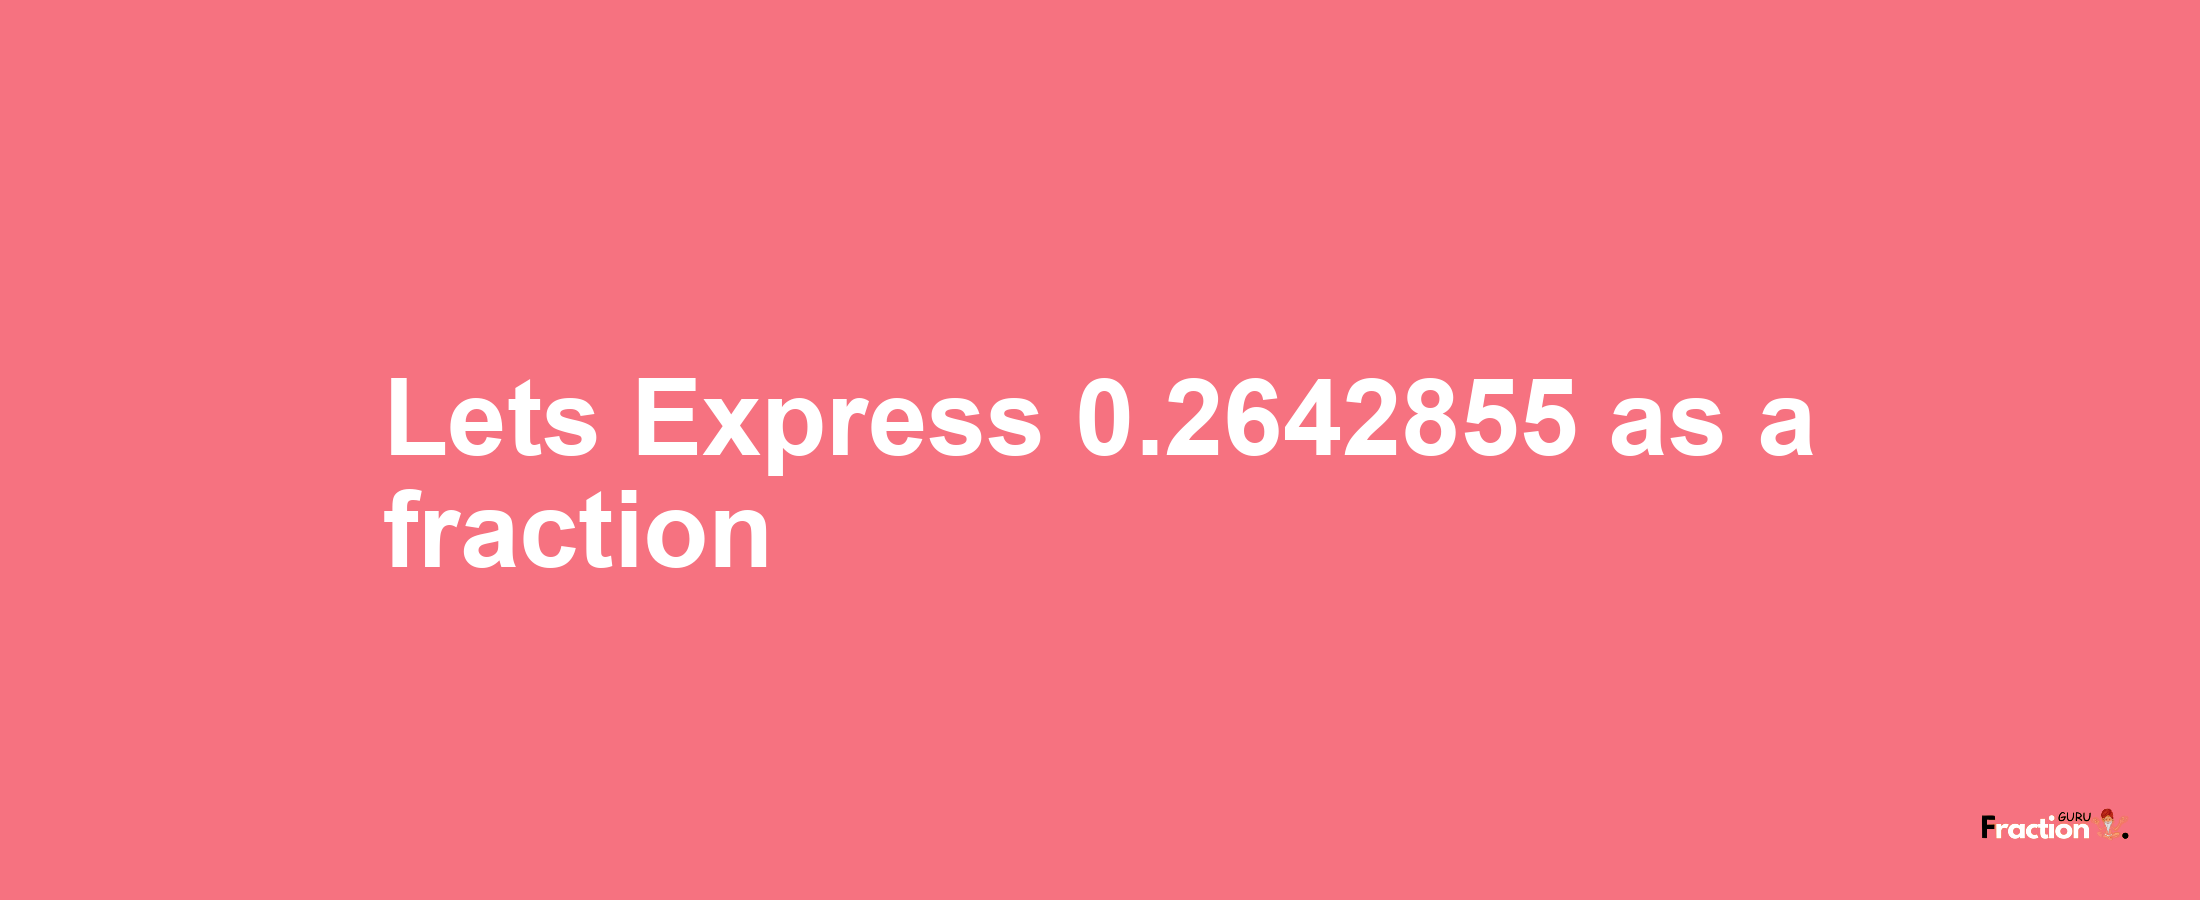 Lets Express 0.2642855 as afraction